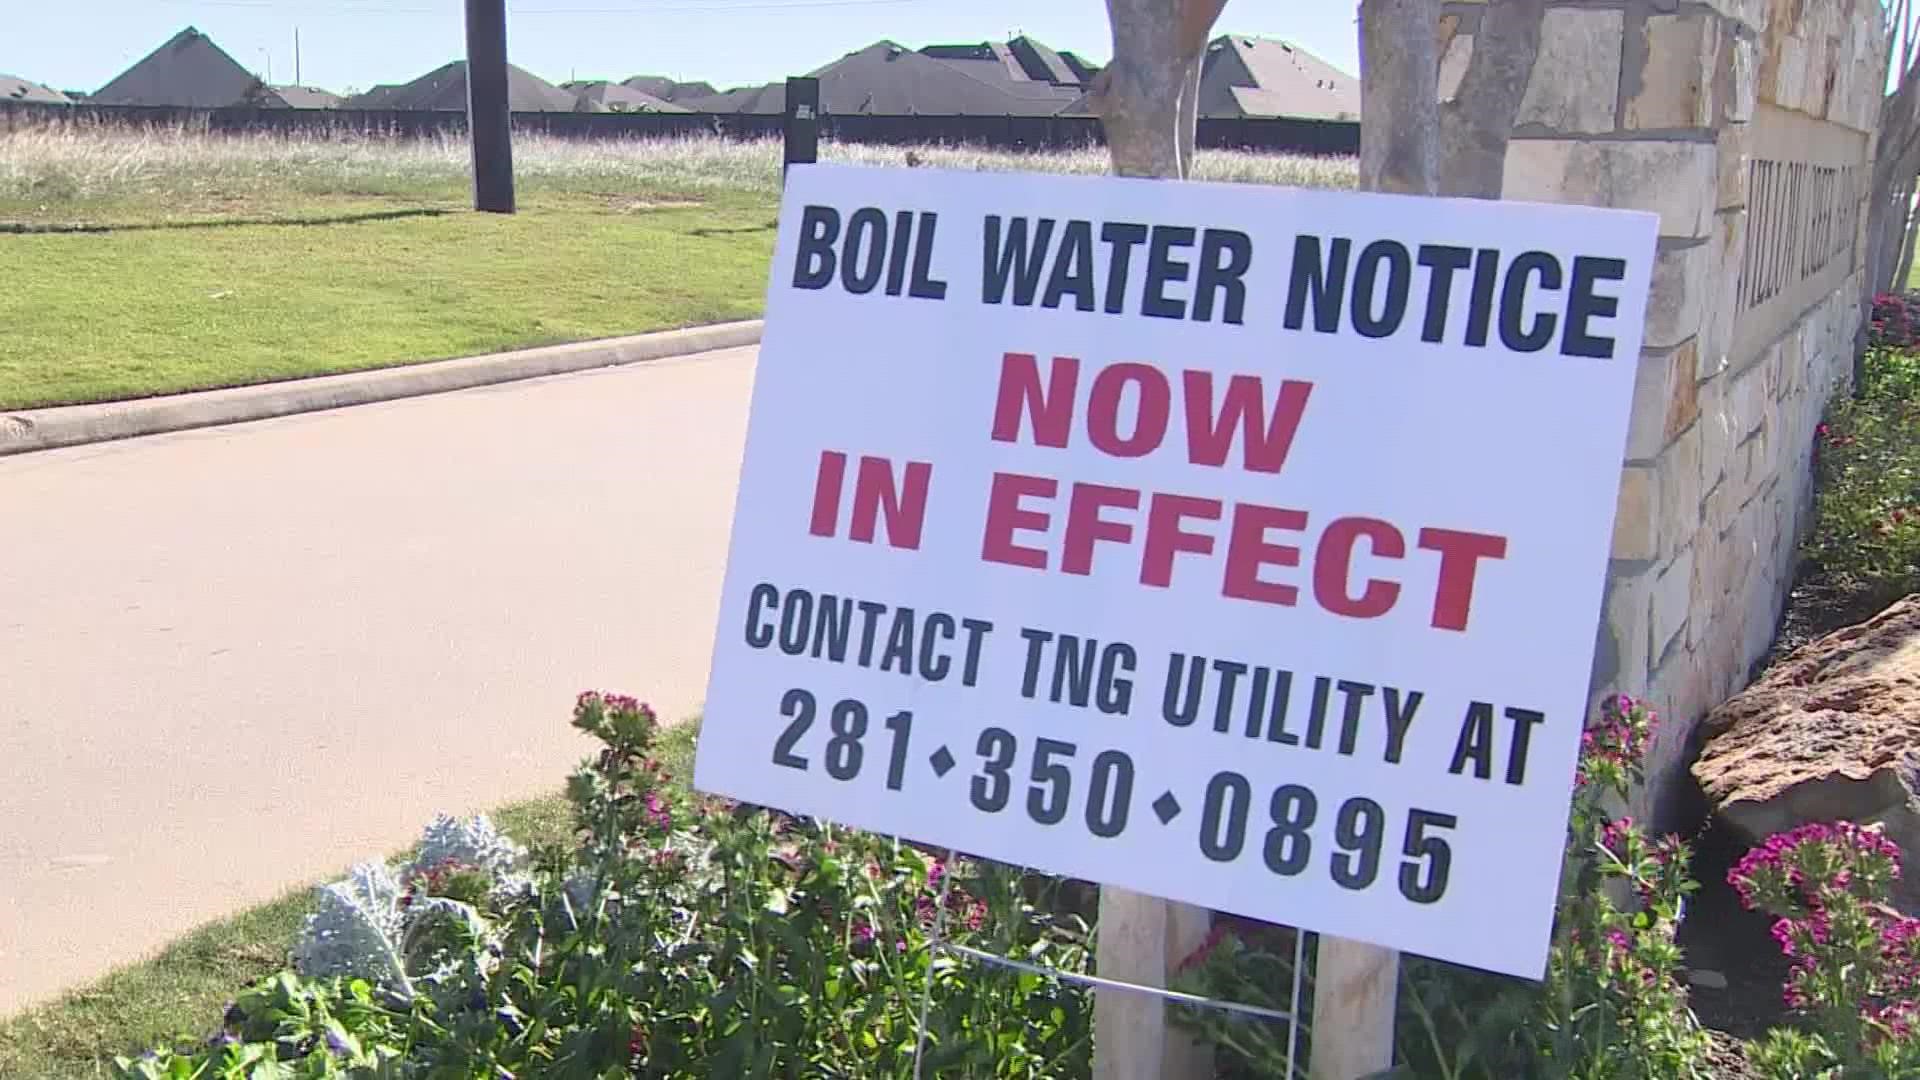 Reporter Adam Bennett looked into what led to the boil water notices in different parts of town.